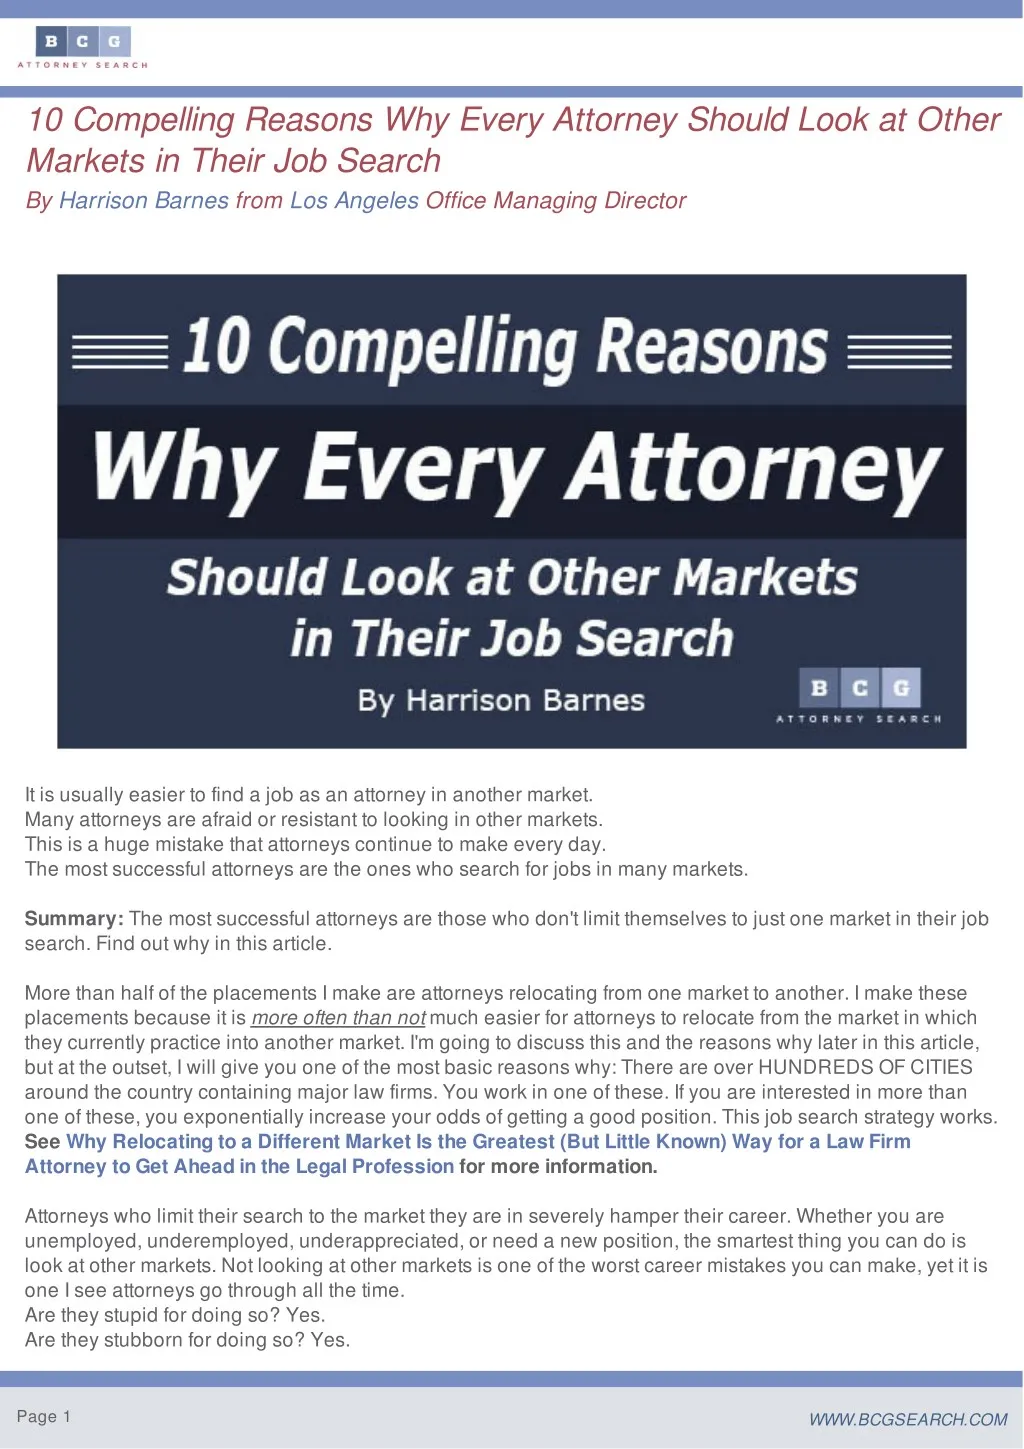 10 compelling reasons why every attorney should